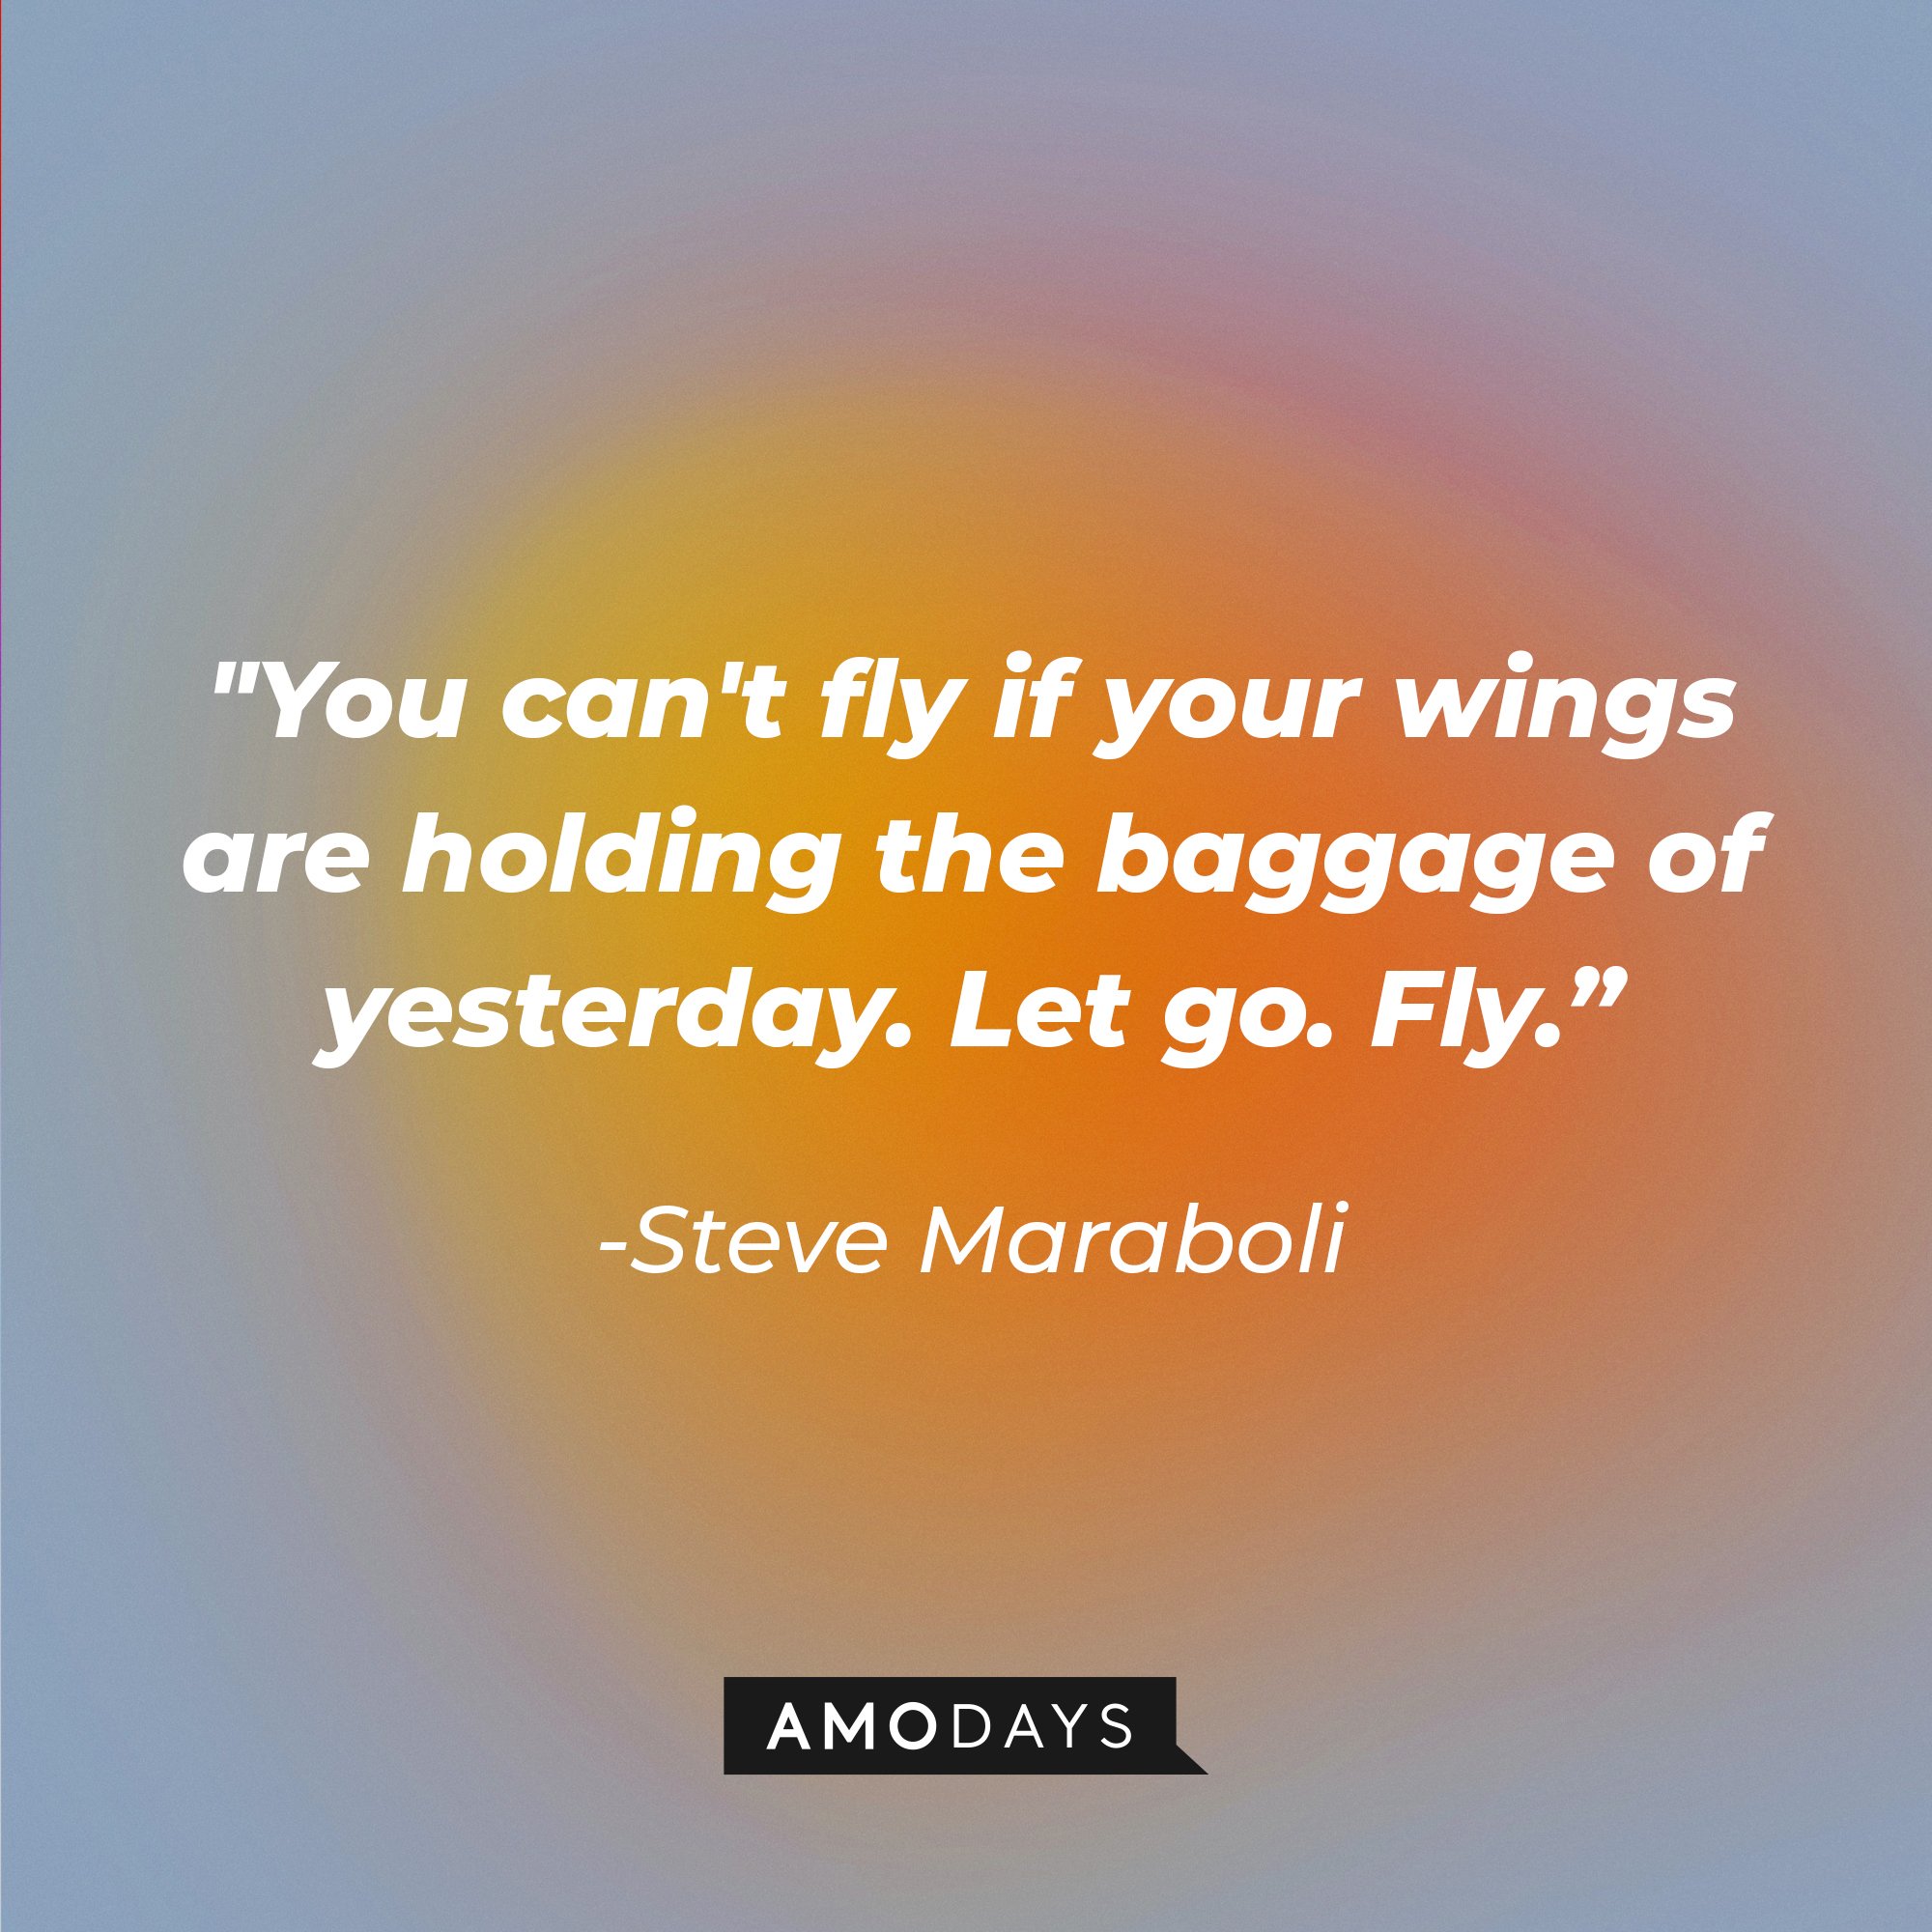 Steve Maraboli’s quote: "You can't fly if your wings are holding the baggage of yesterday. Let go. Fly.” | Image: AmoDays